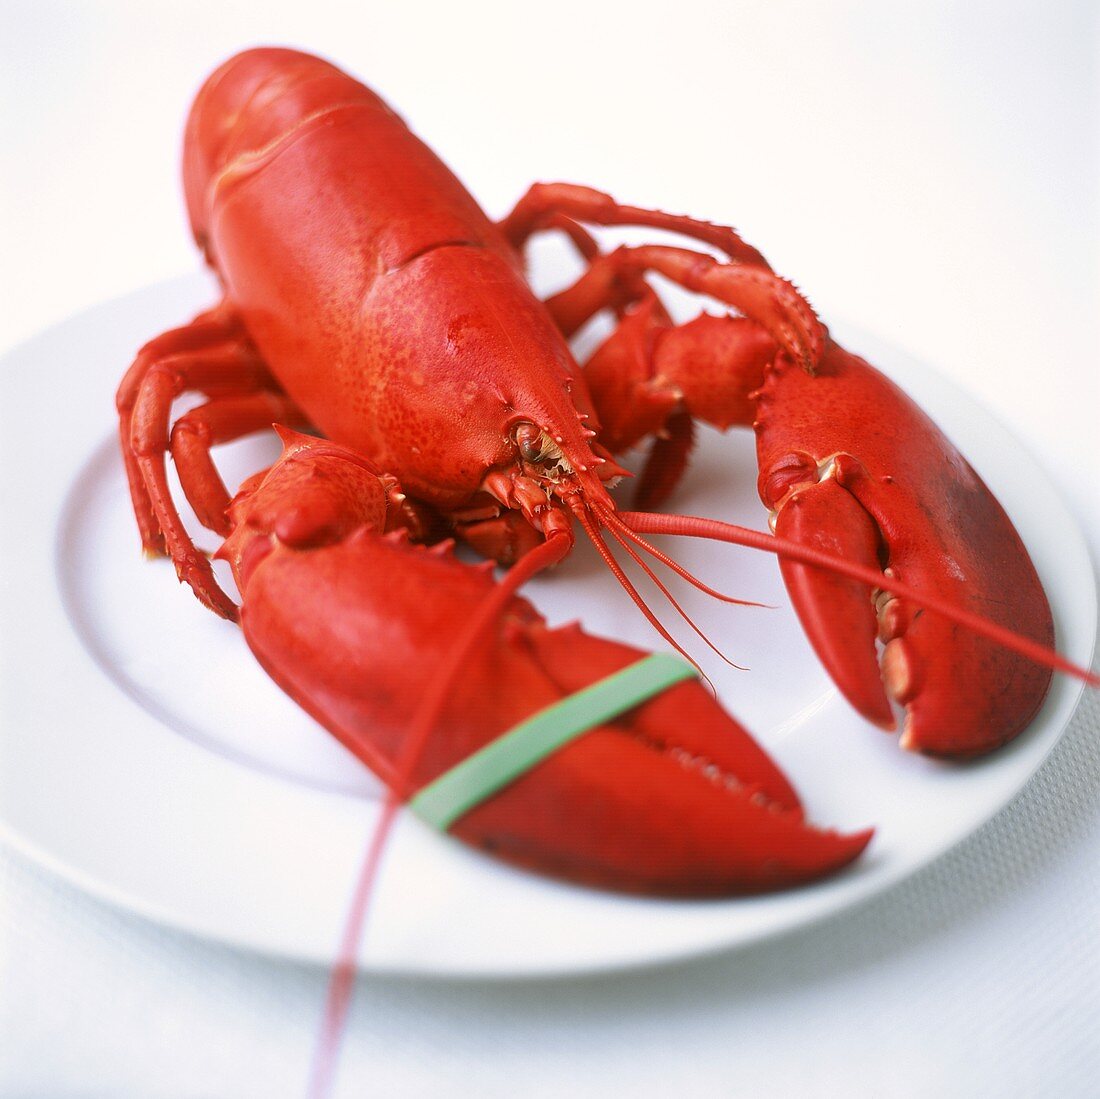 Boiled lobster on plate